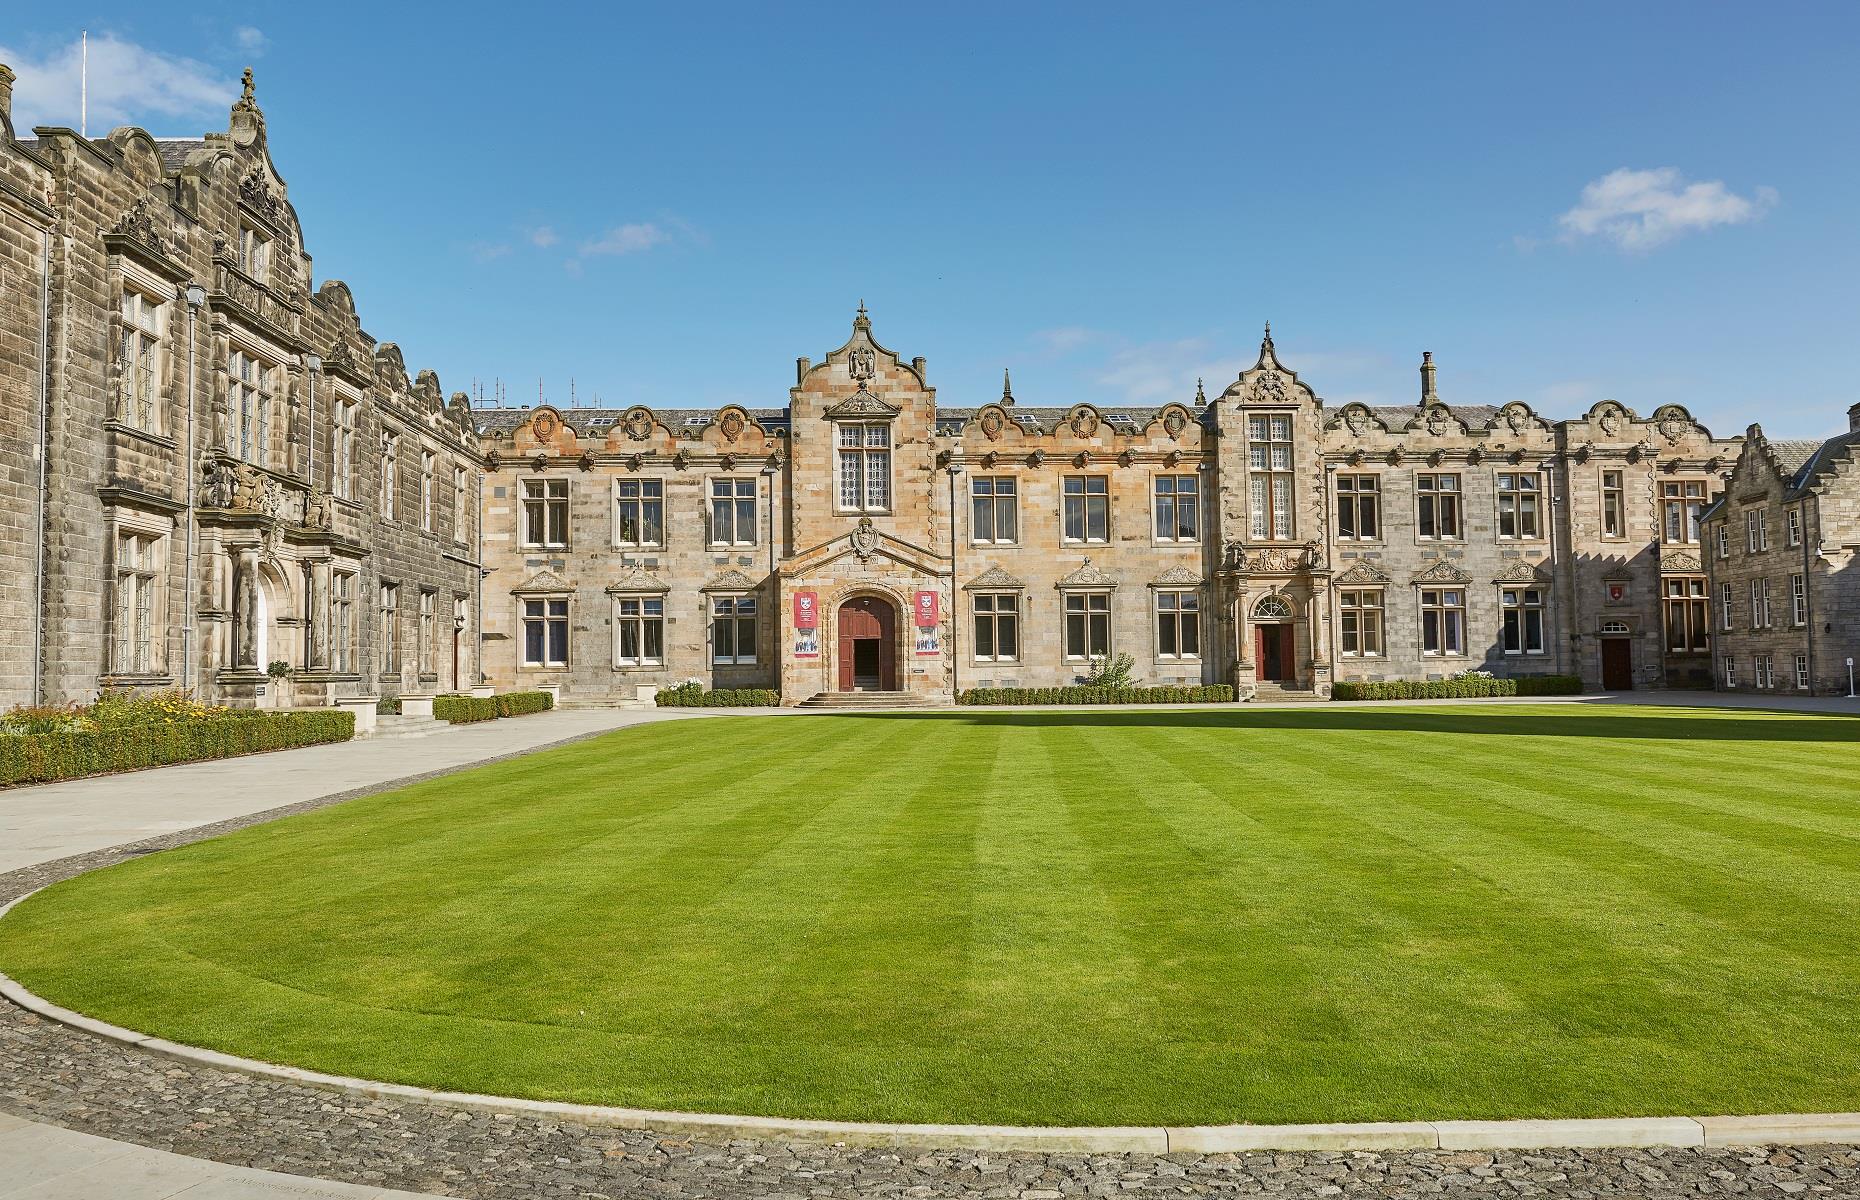 <p>Founded in the 15th century, the <a href="https://www.st-andrews.ac.uk/">University of St Andrews</a> is home to some truly spectacular buildings, including St Salvator's Chapel and Sallies Quad (pictured). It also happens to be mere moments from Scotland's enviable coastline. Famous alumni include Benjamin Franklin, Rudyard Kipling, Prince William and his wife, the Princess of Wales.</p>  <p><strong><a href="https://www.loveexploring.com/gallerylist/71852/30-of-britains-most-historic-towns-and-cities">Discover more of Britain's most historic towns and cities</a></strong></p>